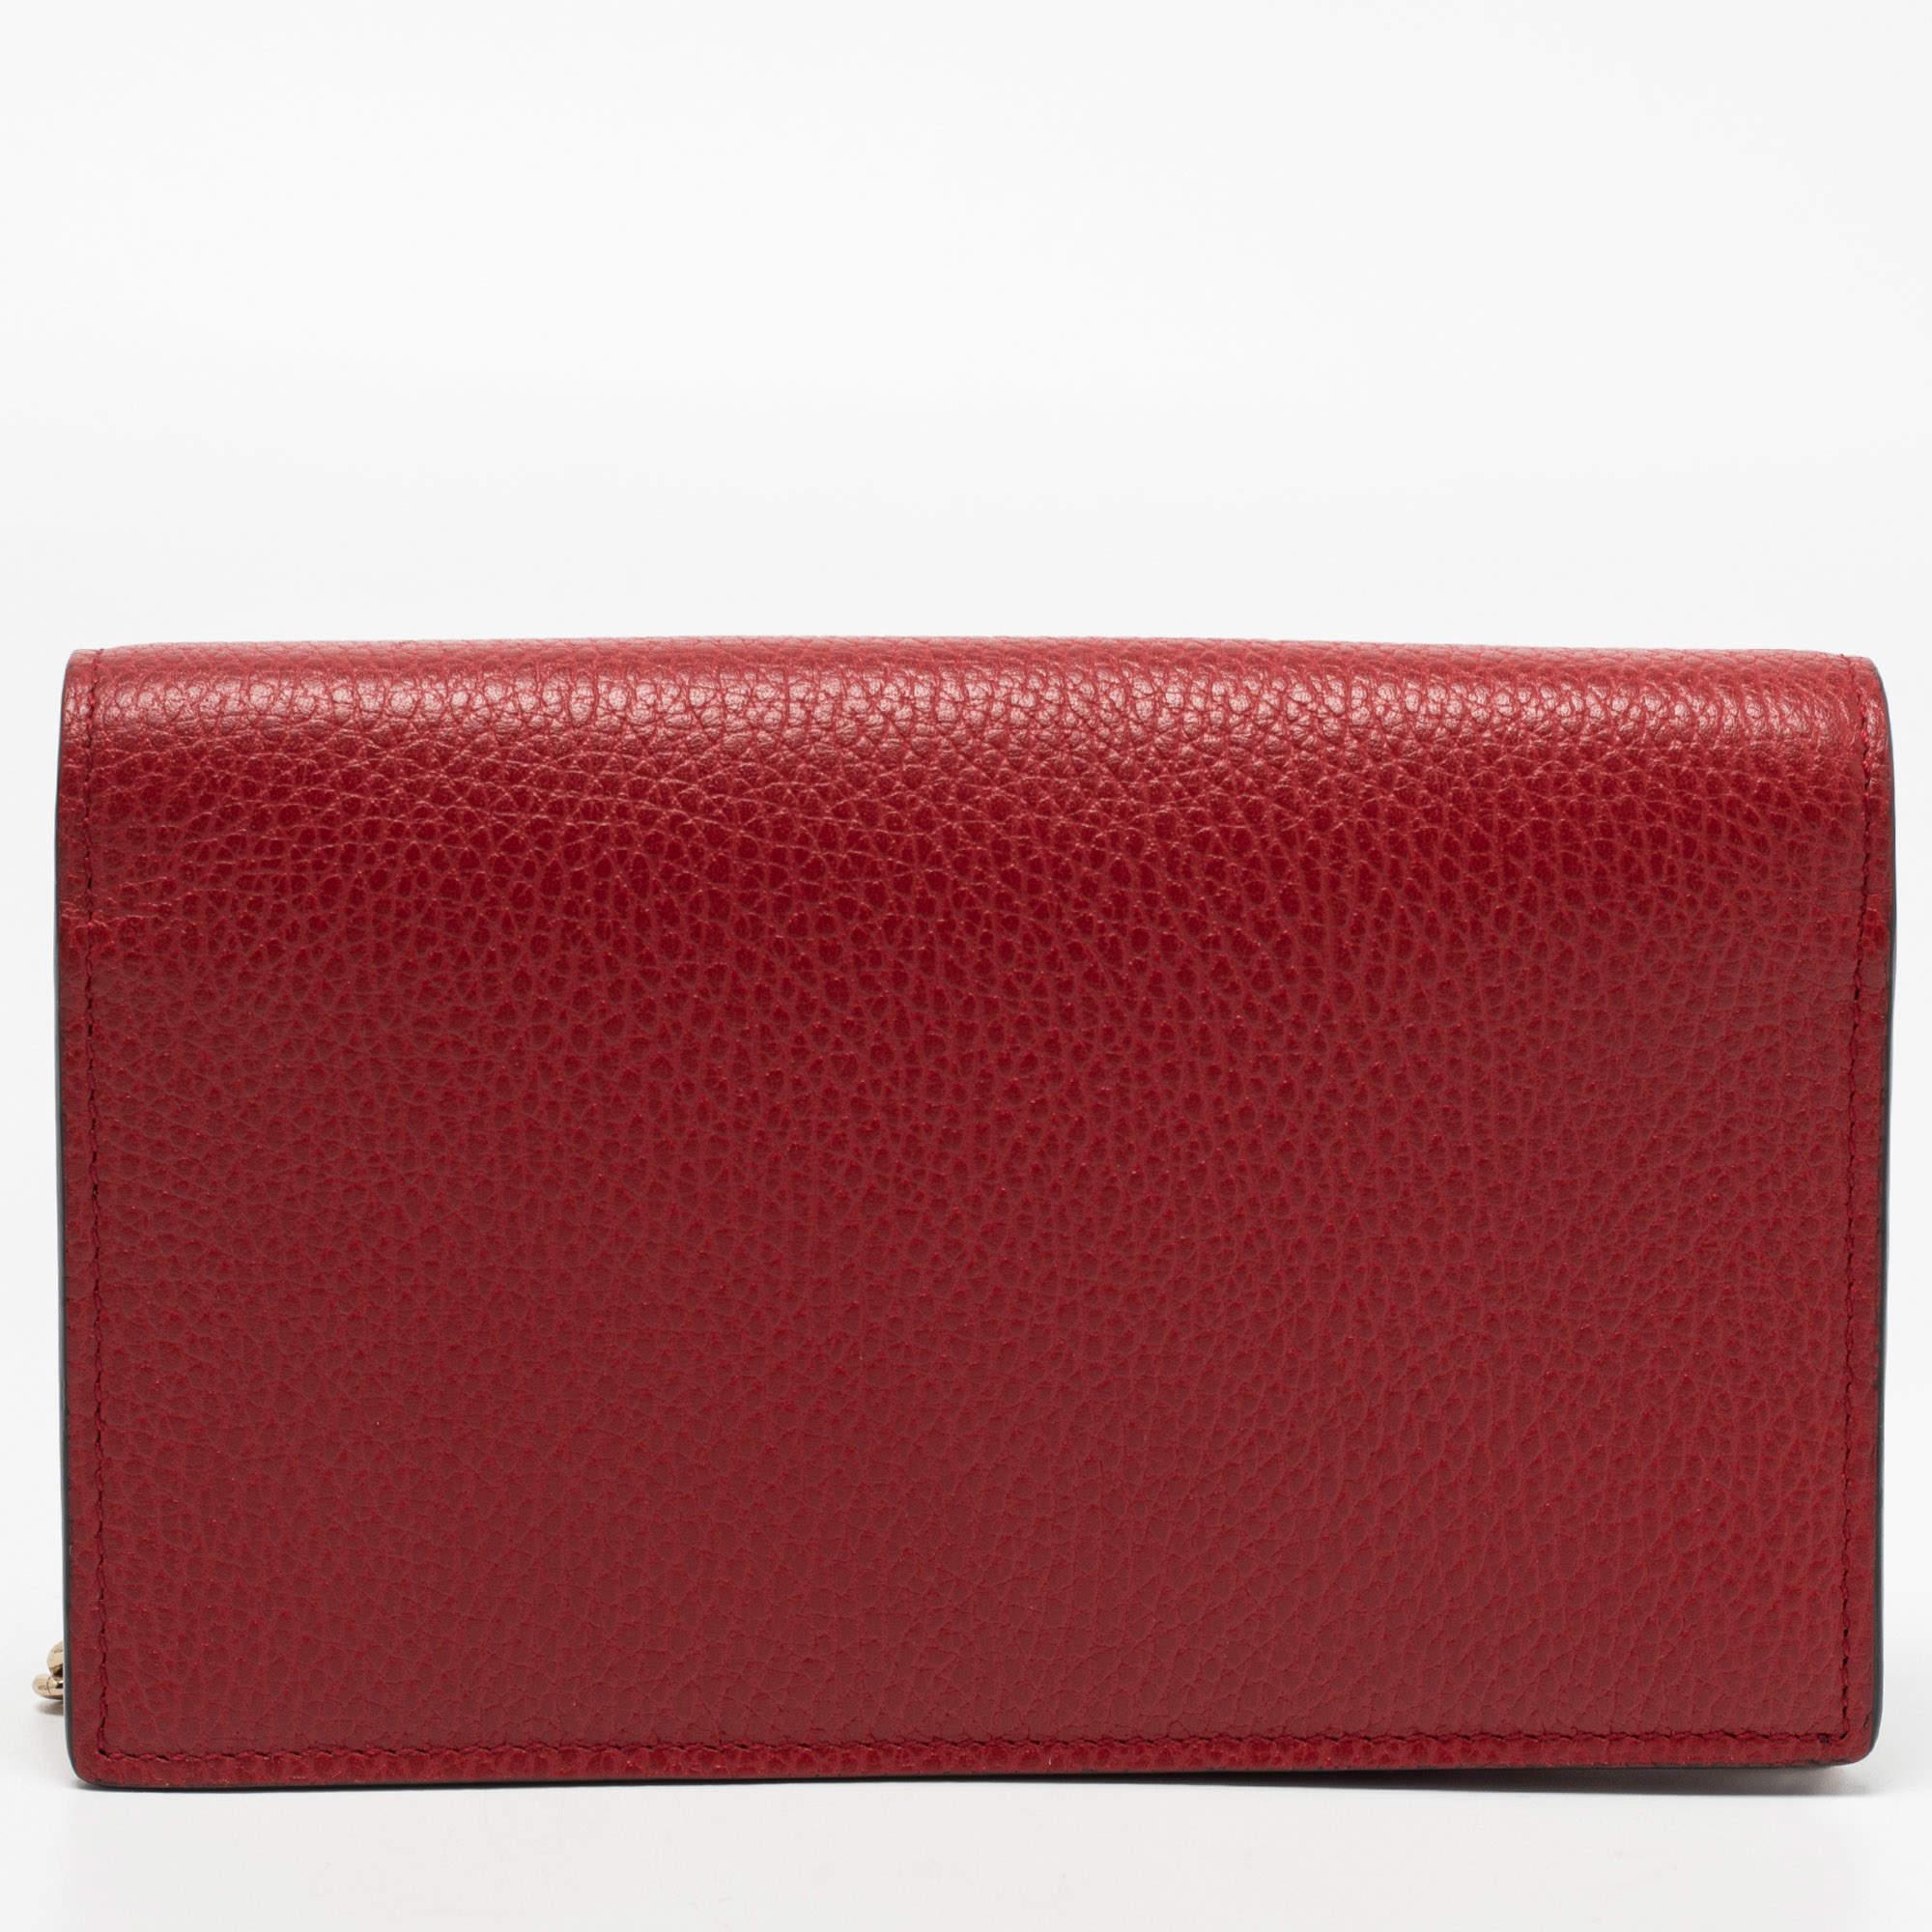 Coming from Gucci, this clutch bag will showcase your fashion-forward choice. Presenting a lovely shade of red and the Interlocking G logo on the front flap, this bag proves to be an impeccable and contemporary addition to your closet.

Includes: